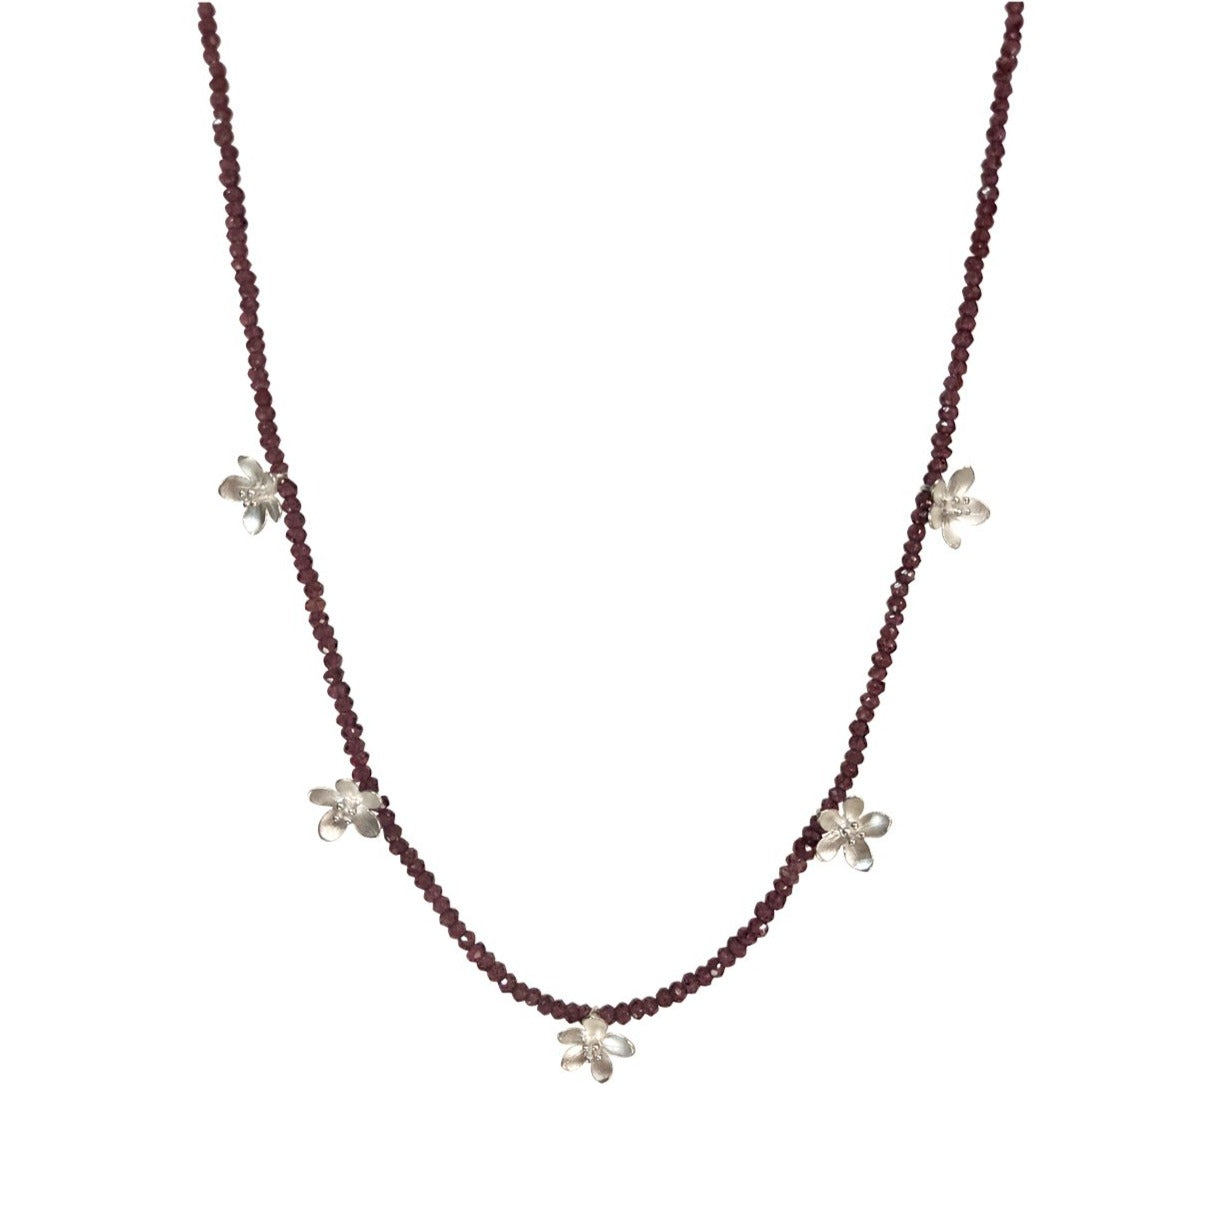 NEW! 5-Mini Apple Blossoms on Garnet Bead Necklace by EAM